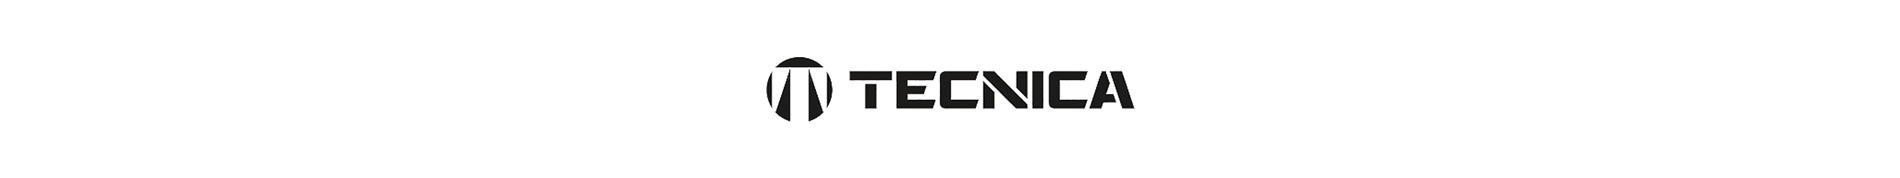 Tecnica Ski Boots for Women, Men and Kids